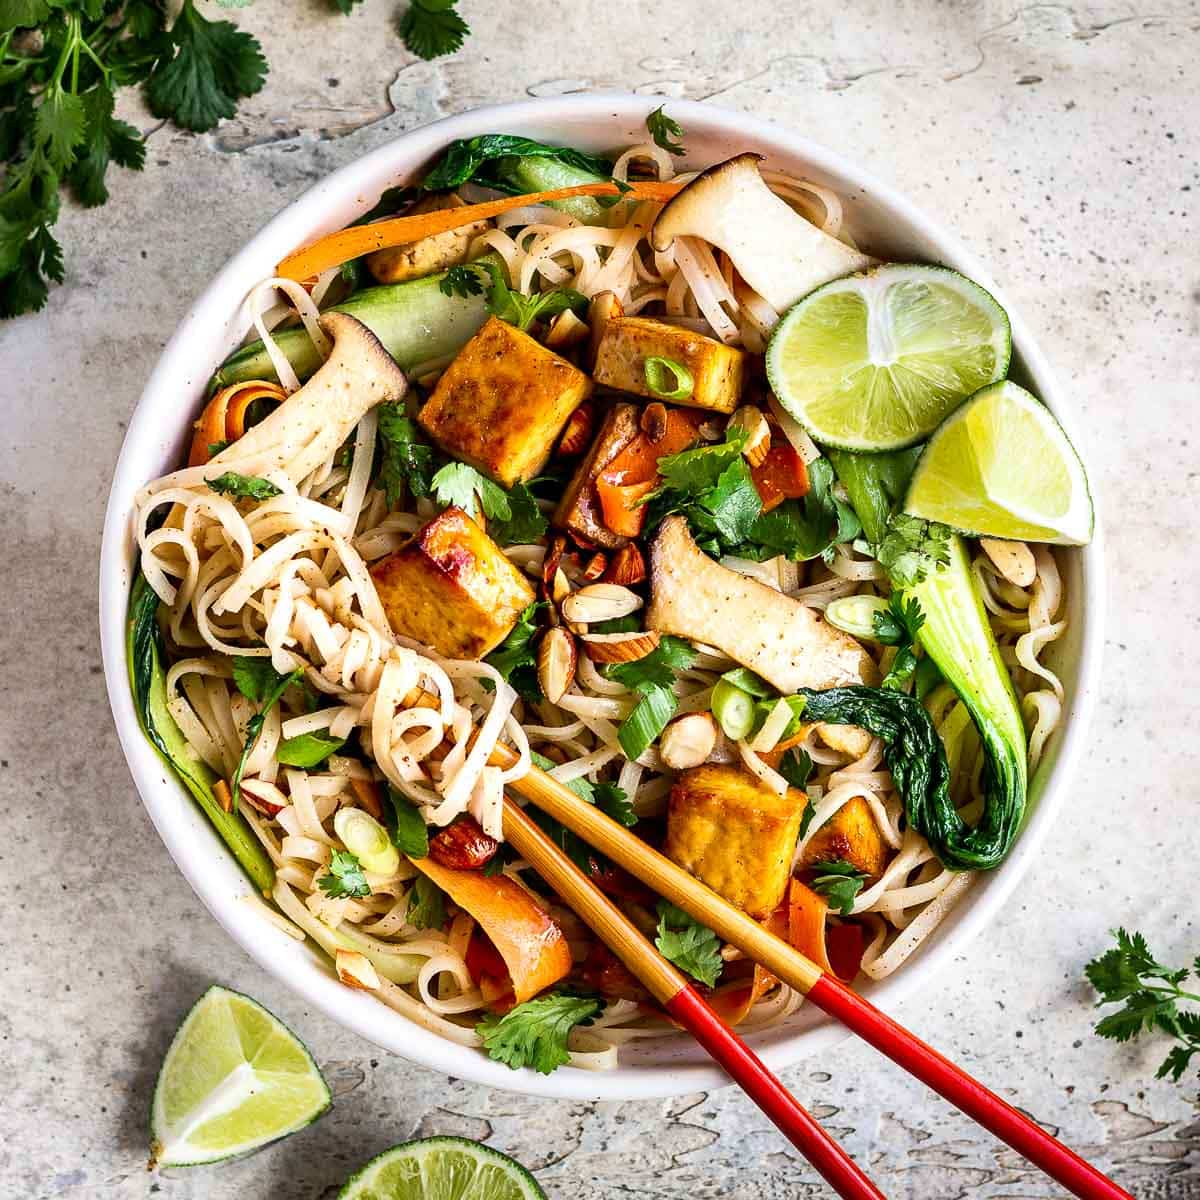 Overhead view of bowl of noodles with tofu, vegetables and almond butter sauce by Elizabeth Emery.